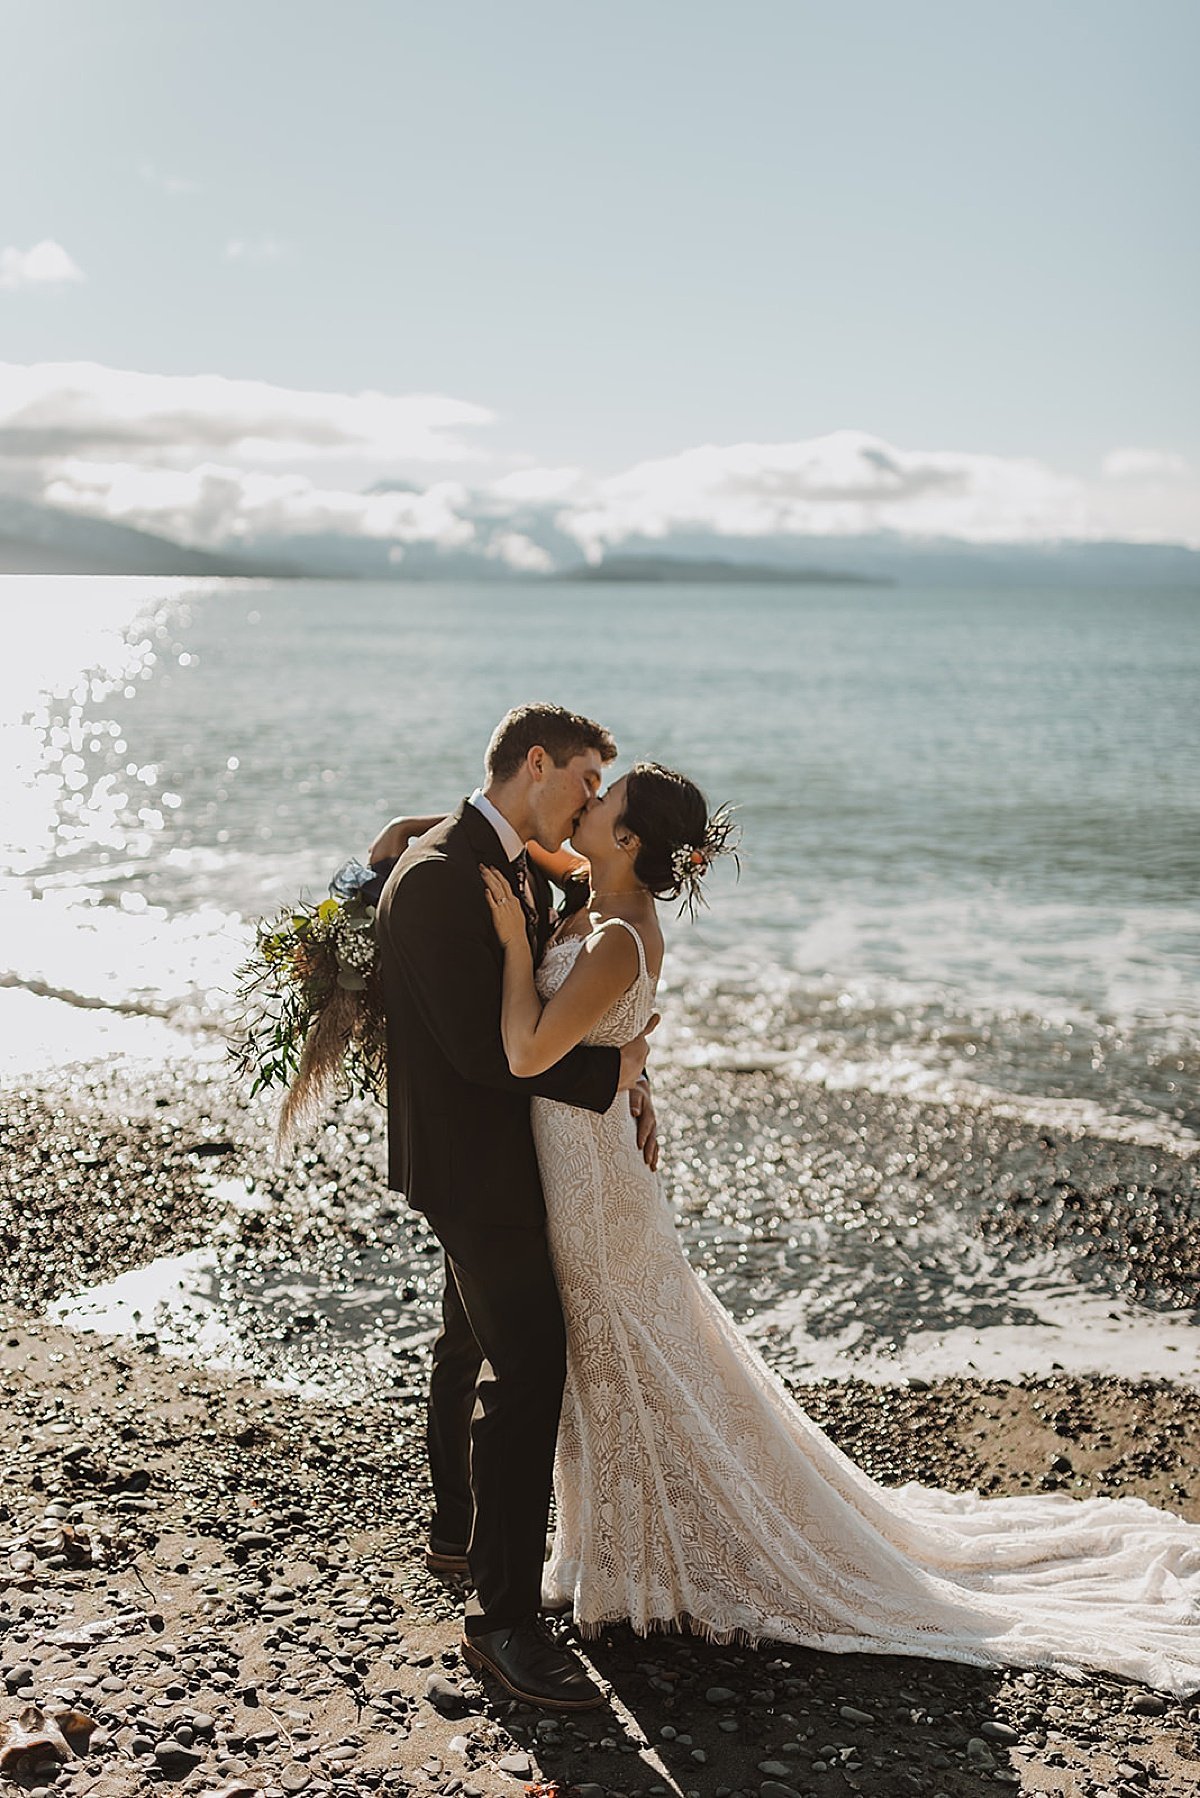  bride with autumn floral bouquet kisses groom on rocky alaska beach during wedding shot by Theresa McDonald Photography 